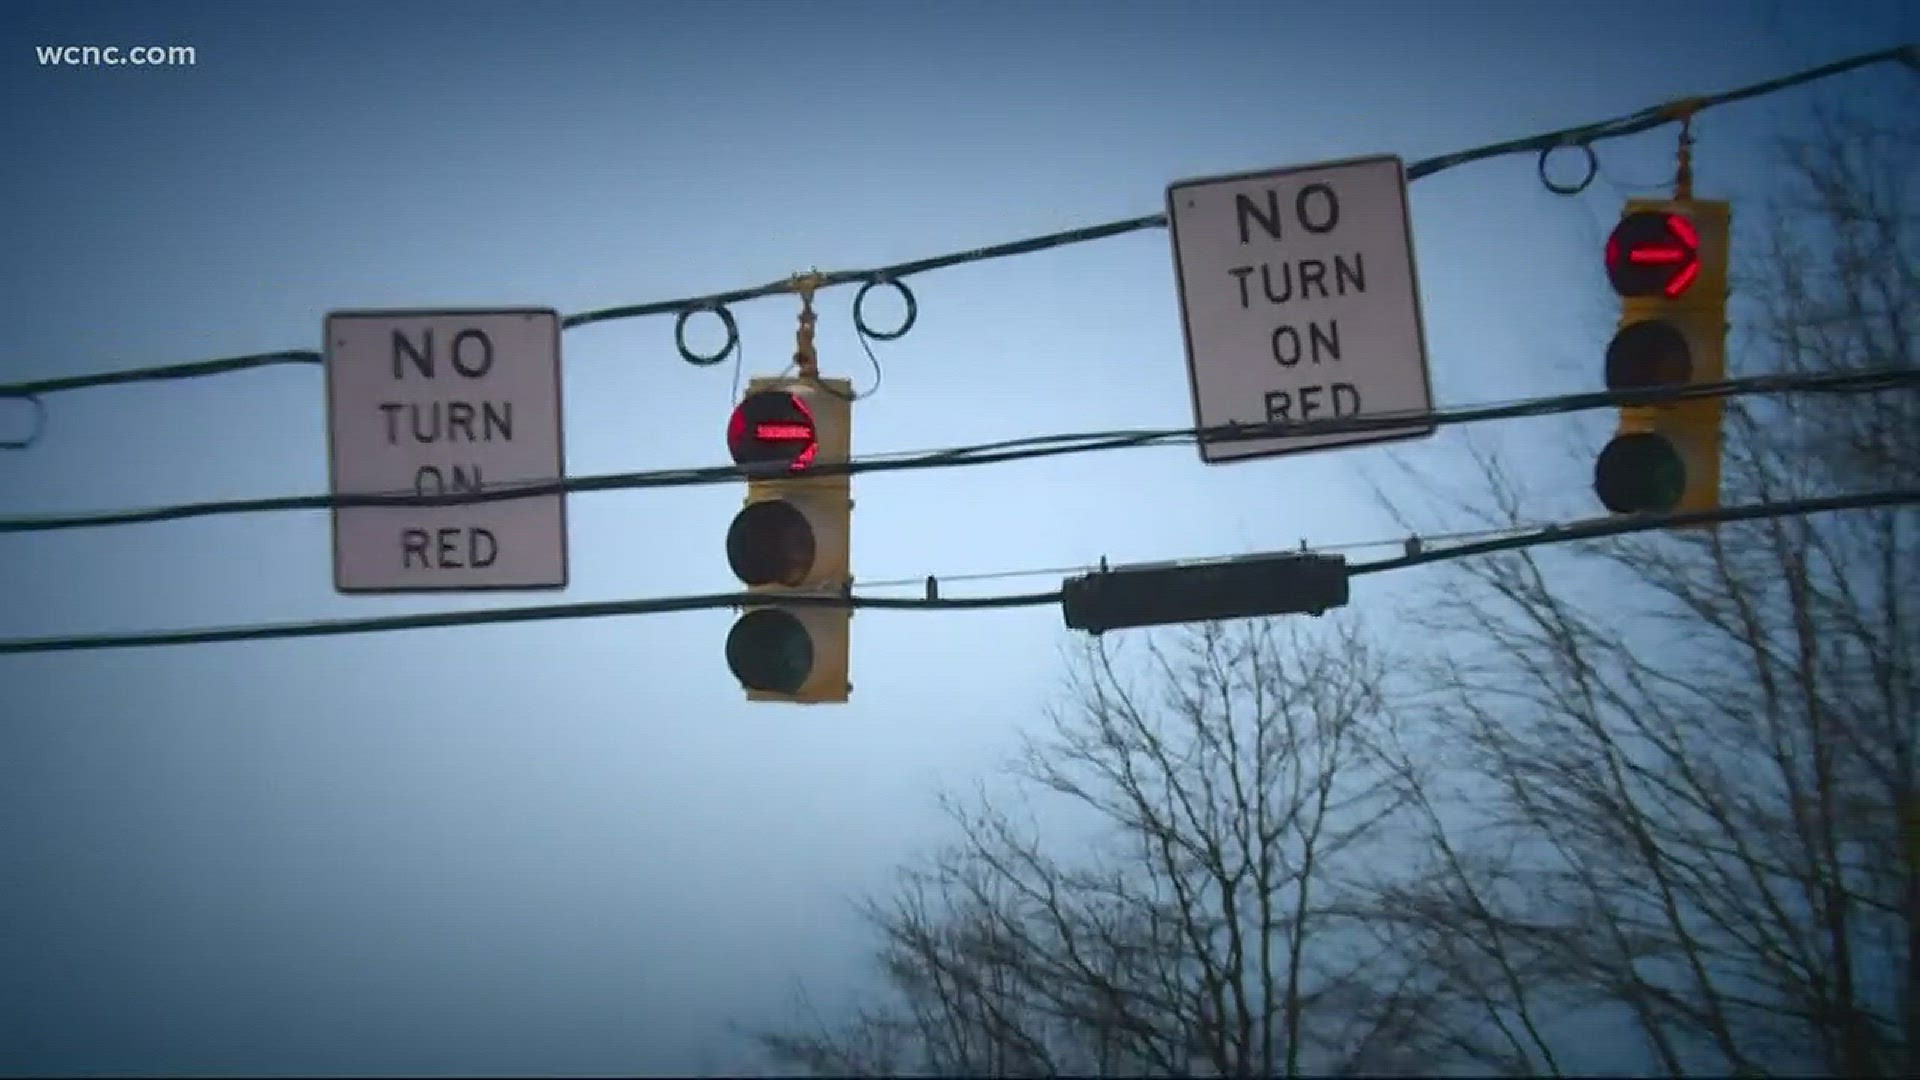 Local police are reminding drivers to not turn right on red arrow lights.